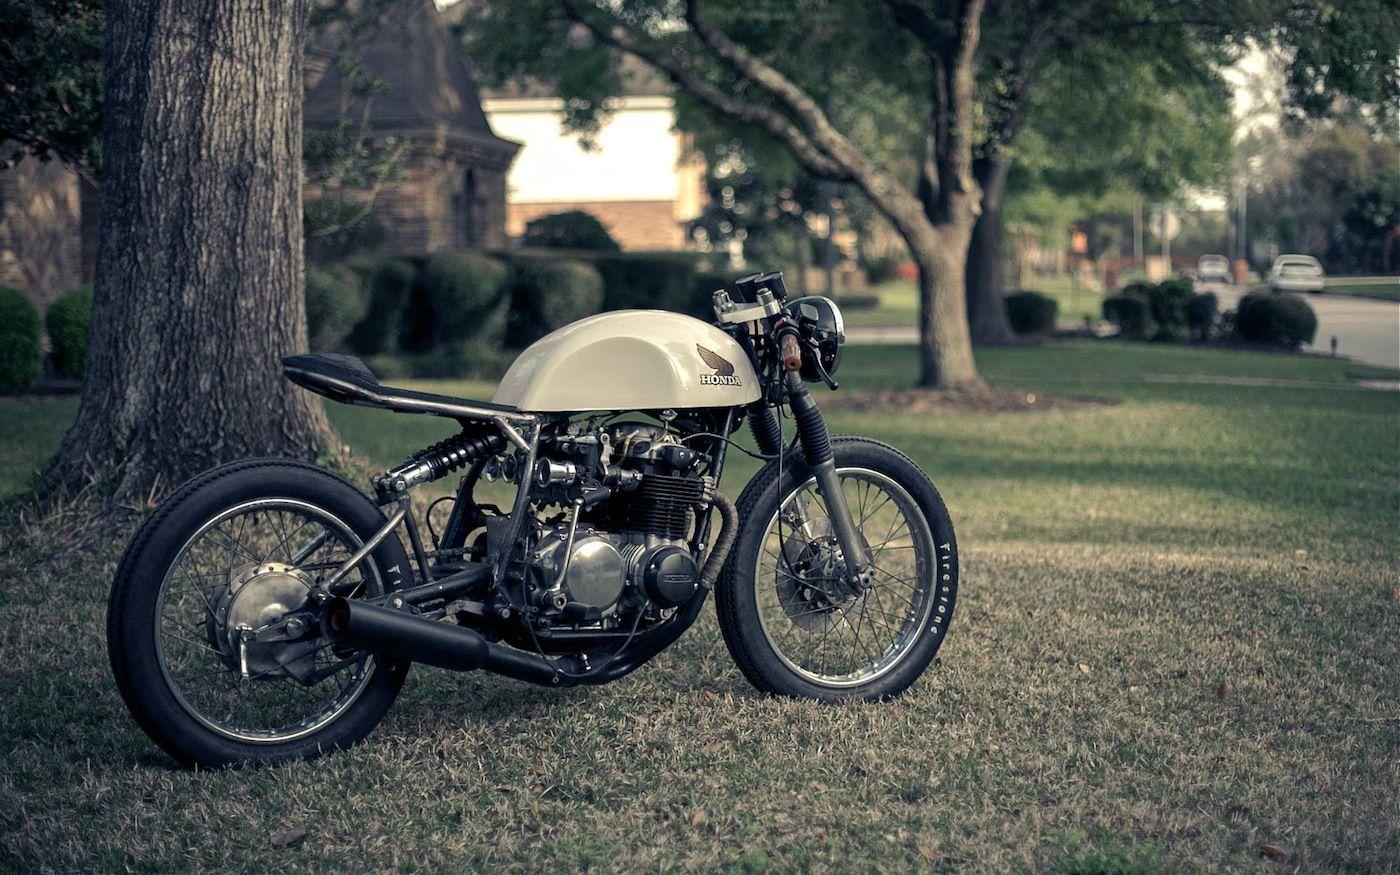  Cafe Racer Wallpapers HD Wallpaper Cave